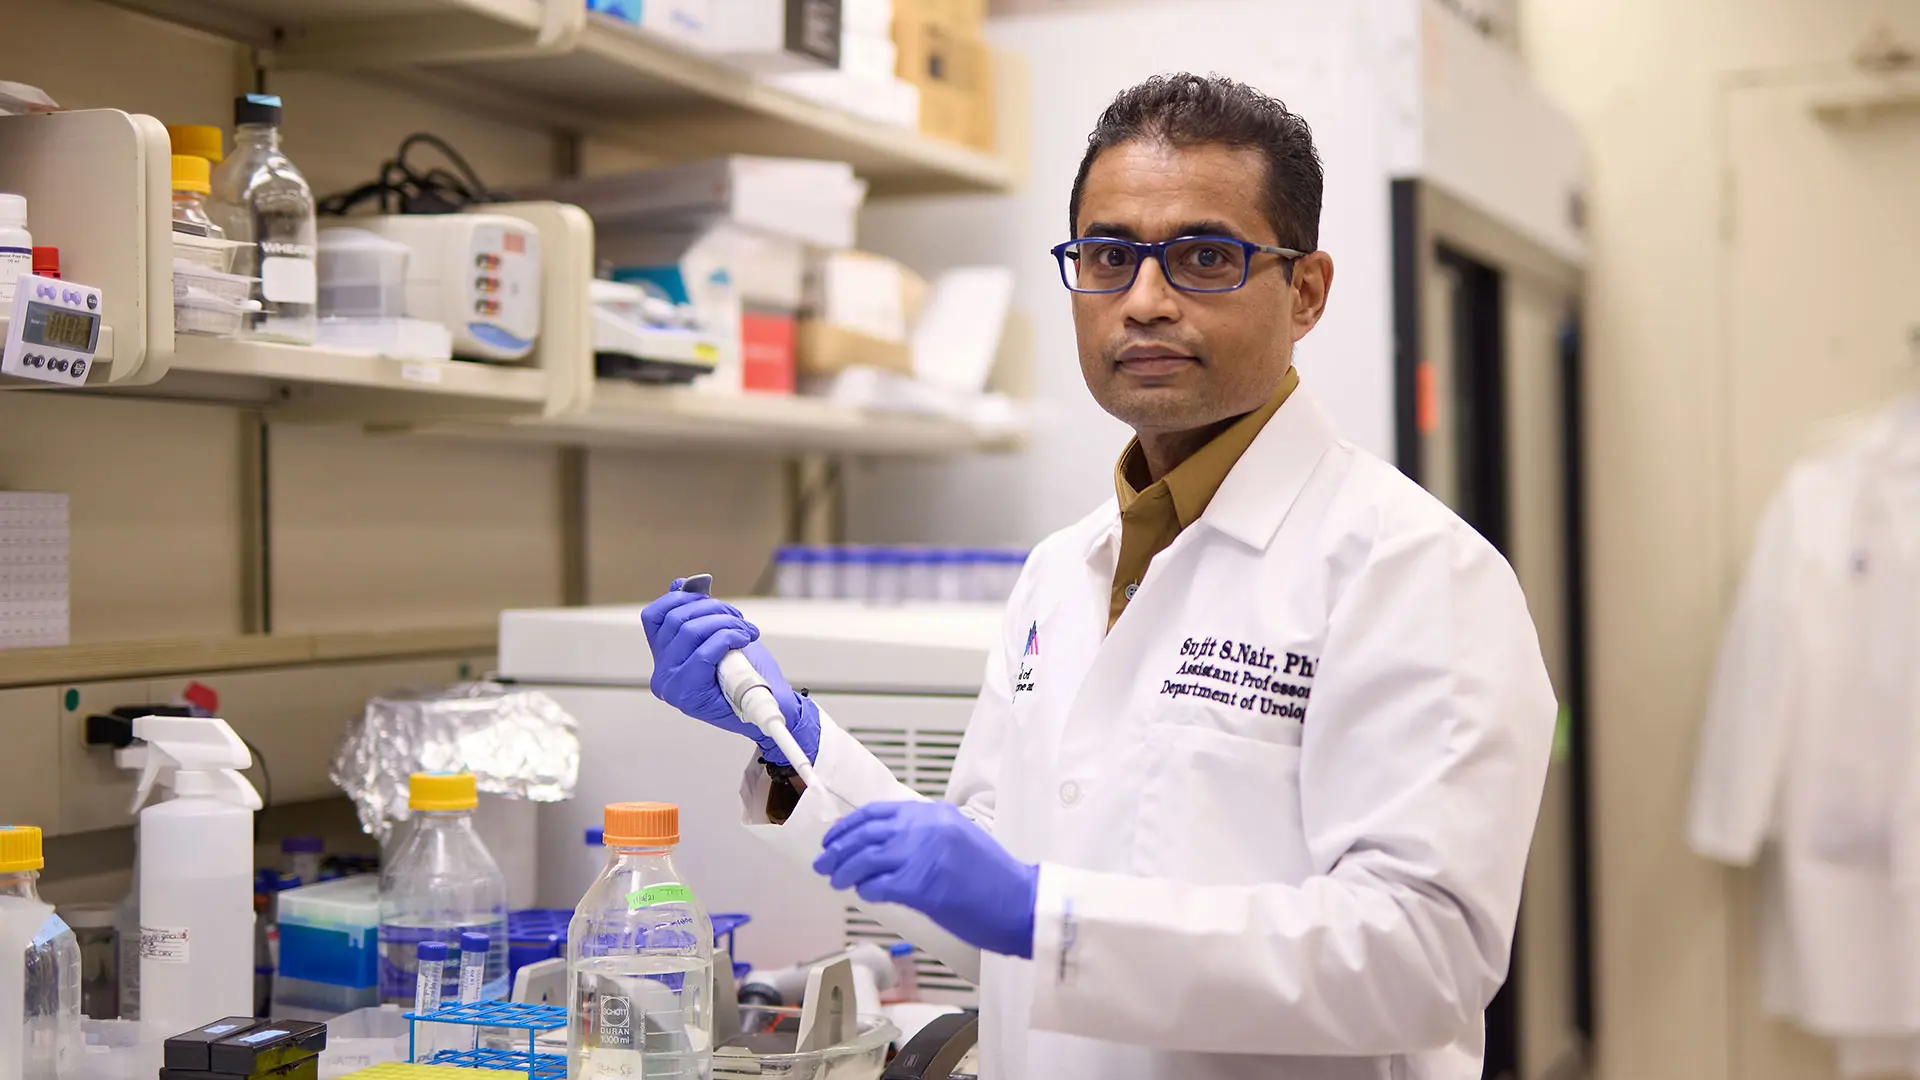 Sujit S. Nair, PhD, Assistant Professor and Director of Genitourinary (GU) Immunotherapy Research at the Department of Urology 